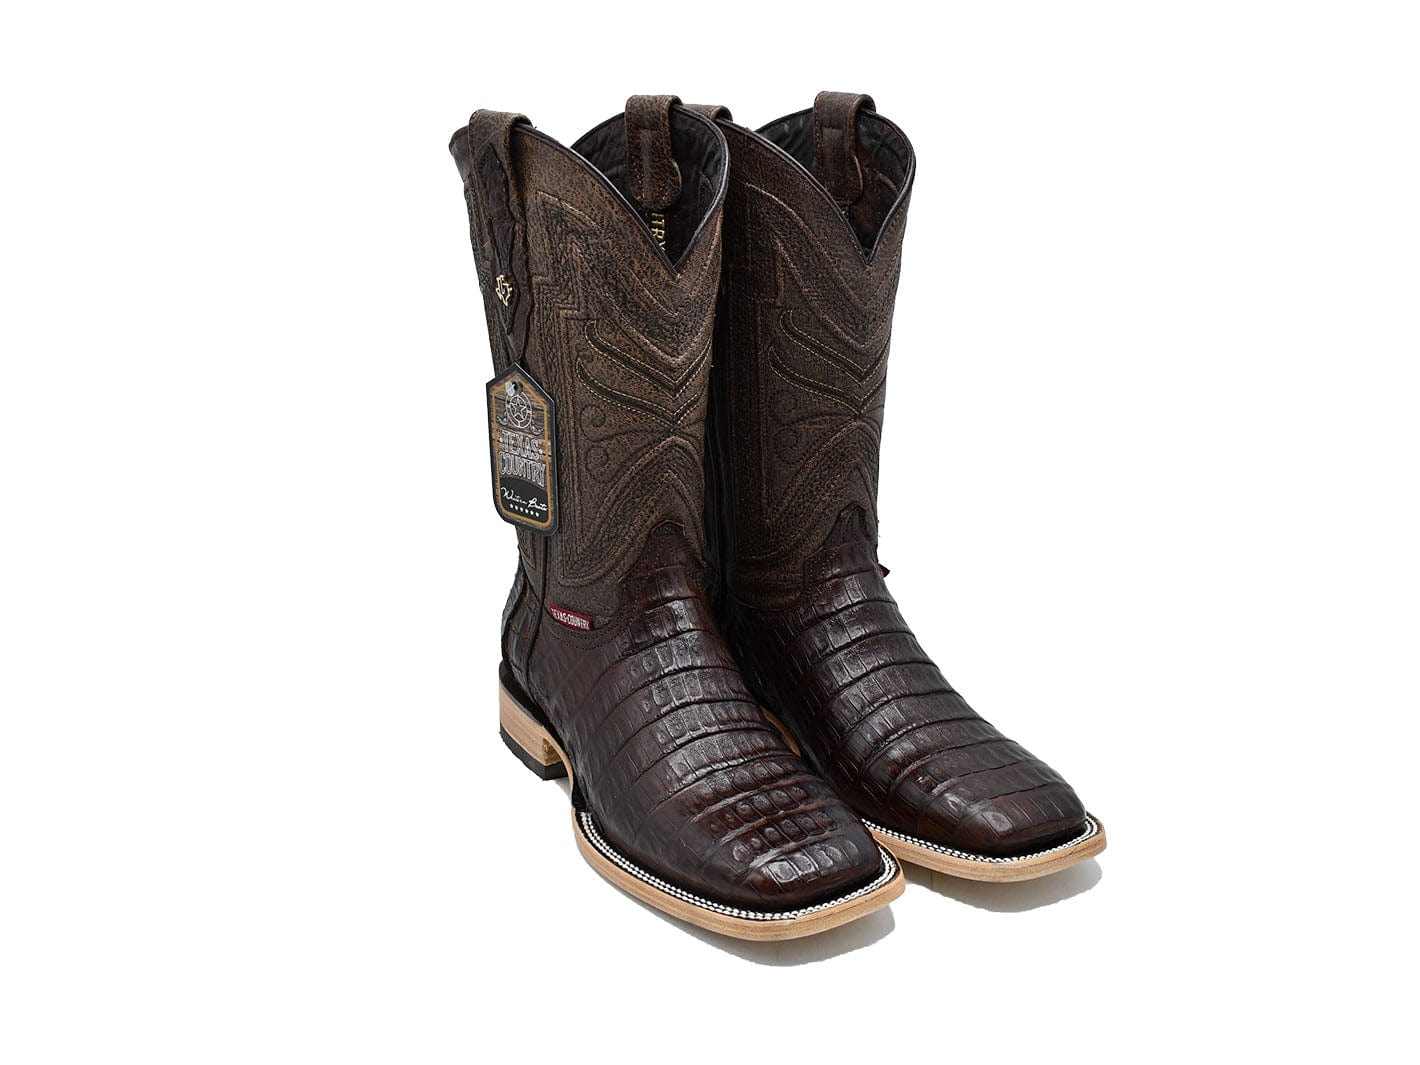 Texas Country Exotic Boot Cola Caiman Belly Tabacco Square Toe LM10